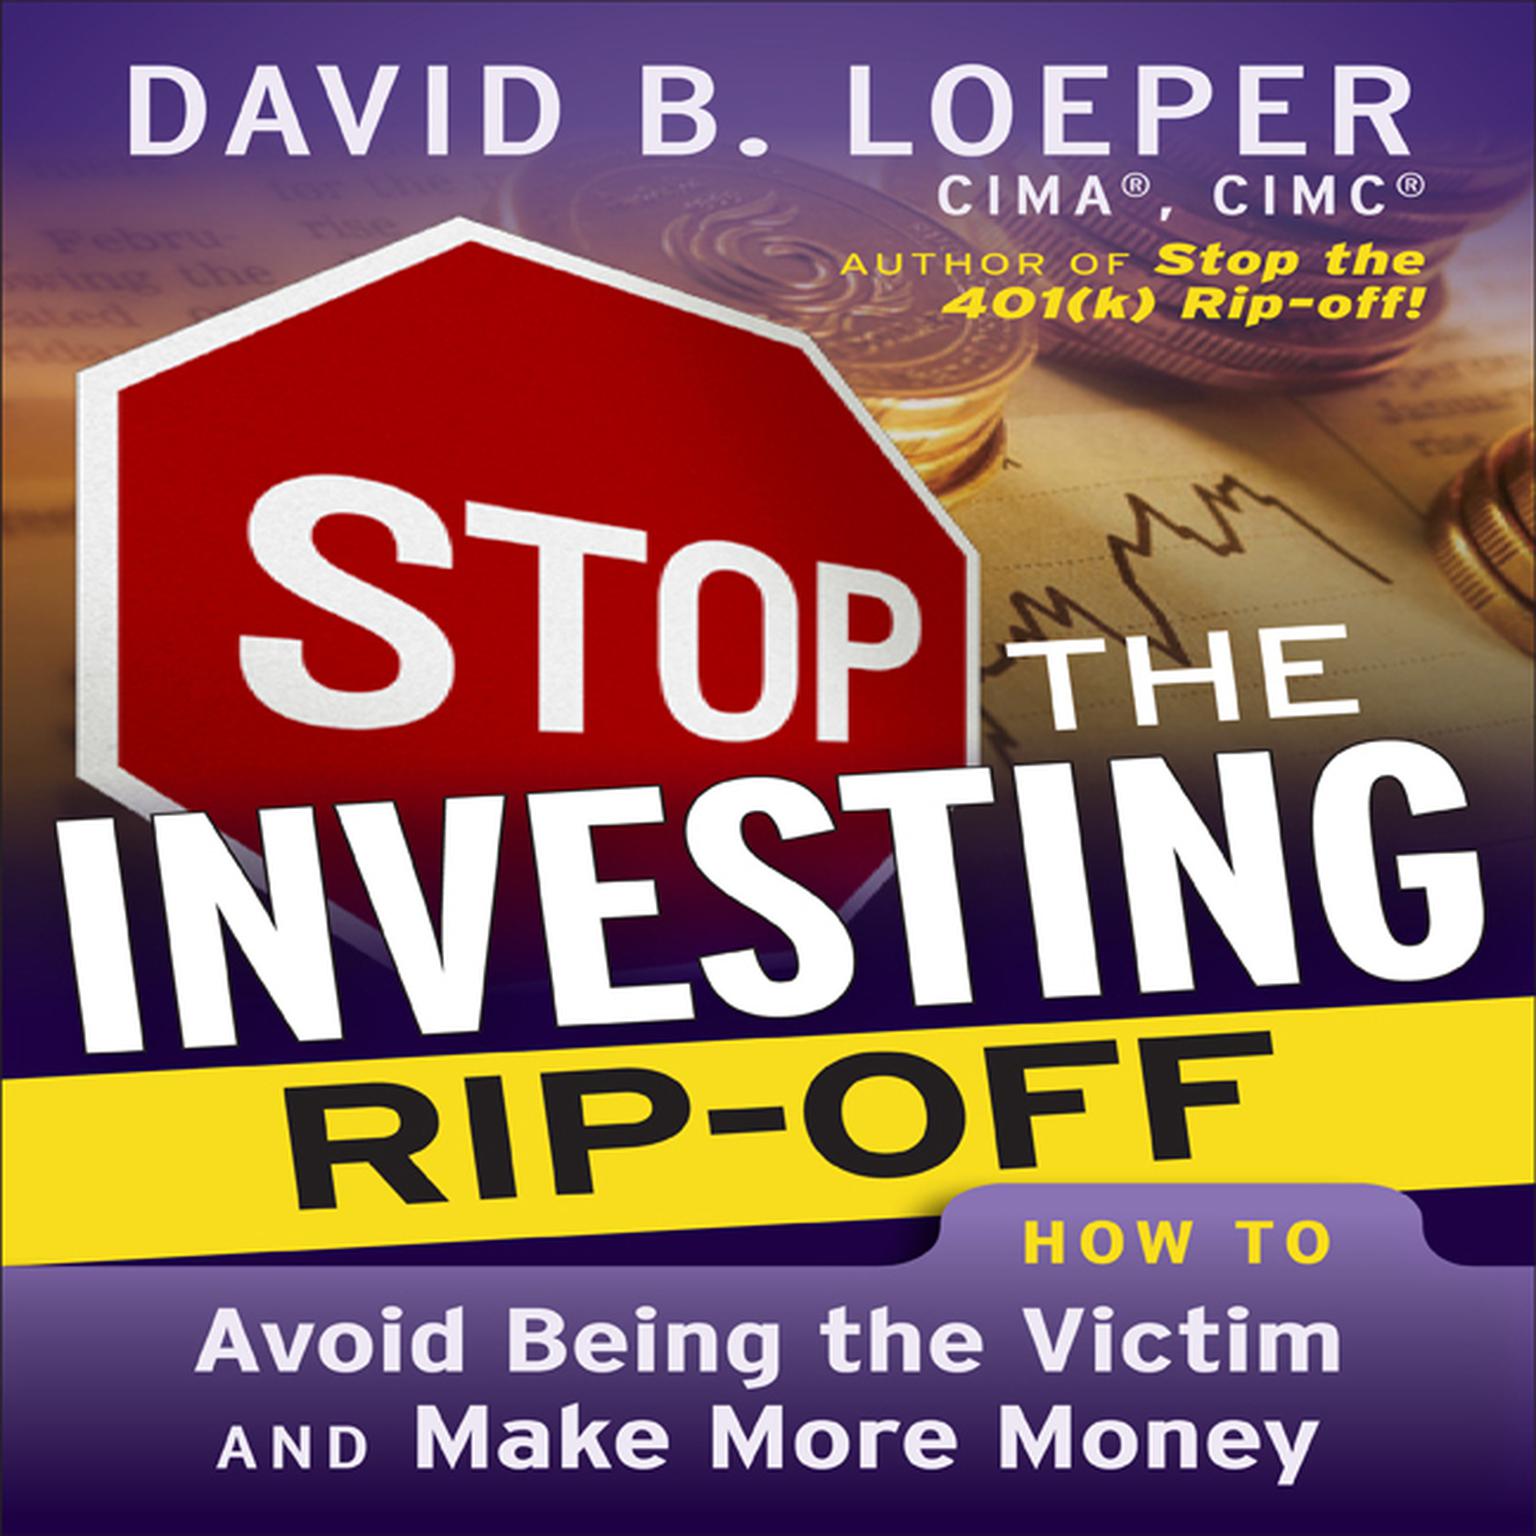 Stop The Investing Rip-Off (Abridged): How to Avoid Being a Victim and Make More Money Audiobook, by David B. Loeper